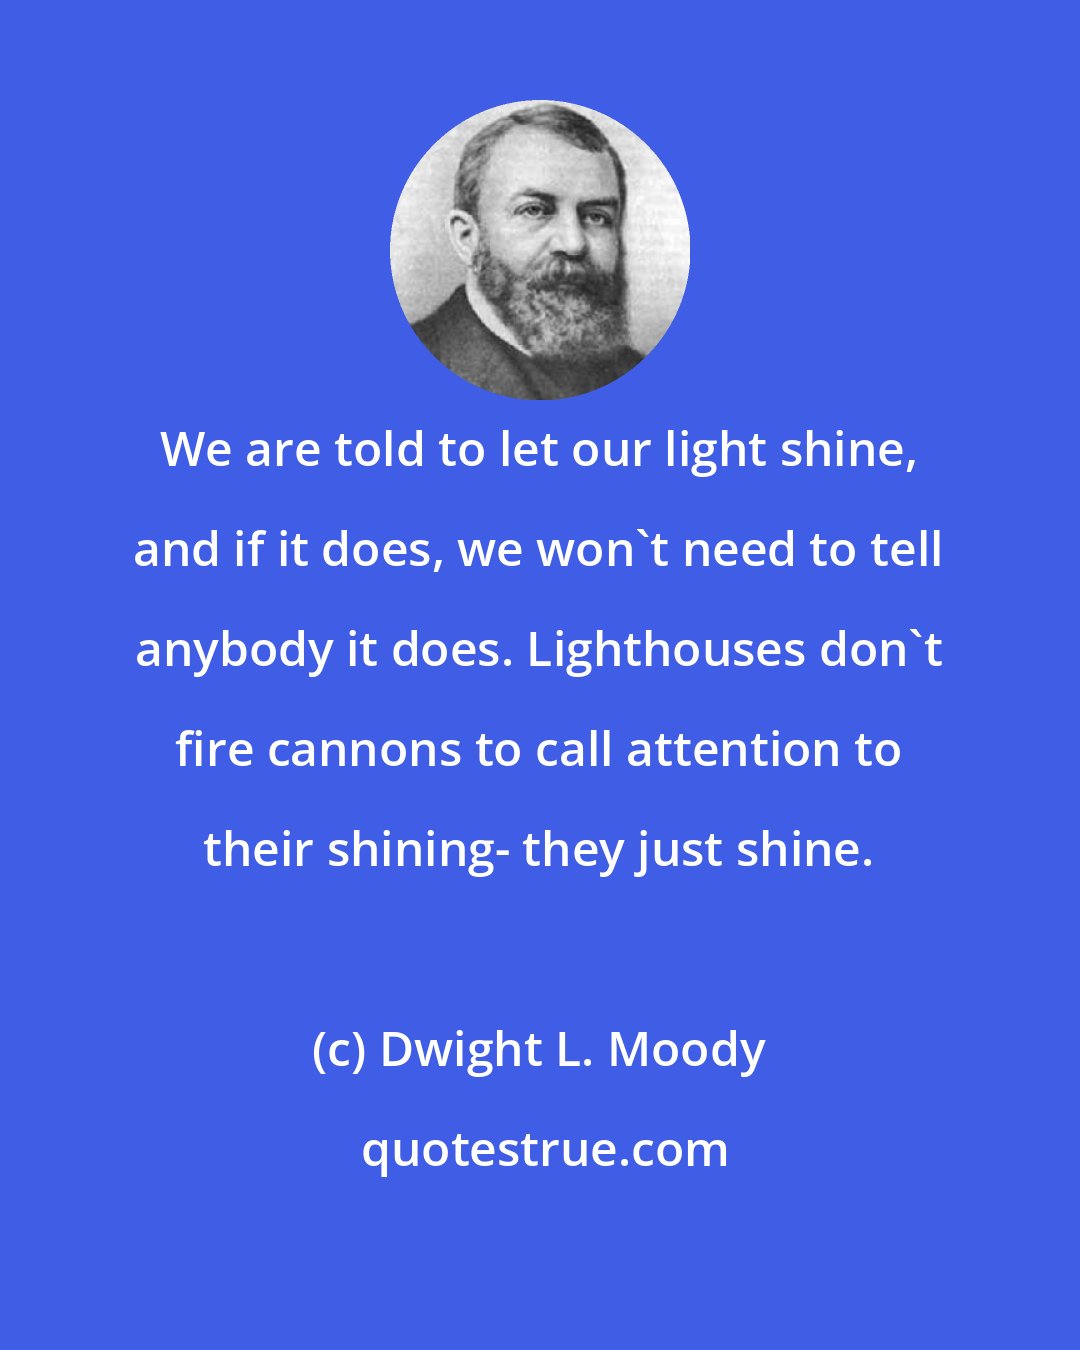 Dwight L. Moody: We are told to let our light shine, and if it does, we won't need to tell anybody it does. Lighthouses don't fire cannons to call attention to their shining- they just shine.